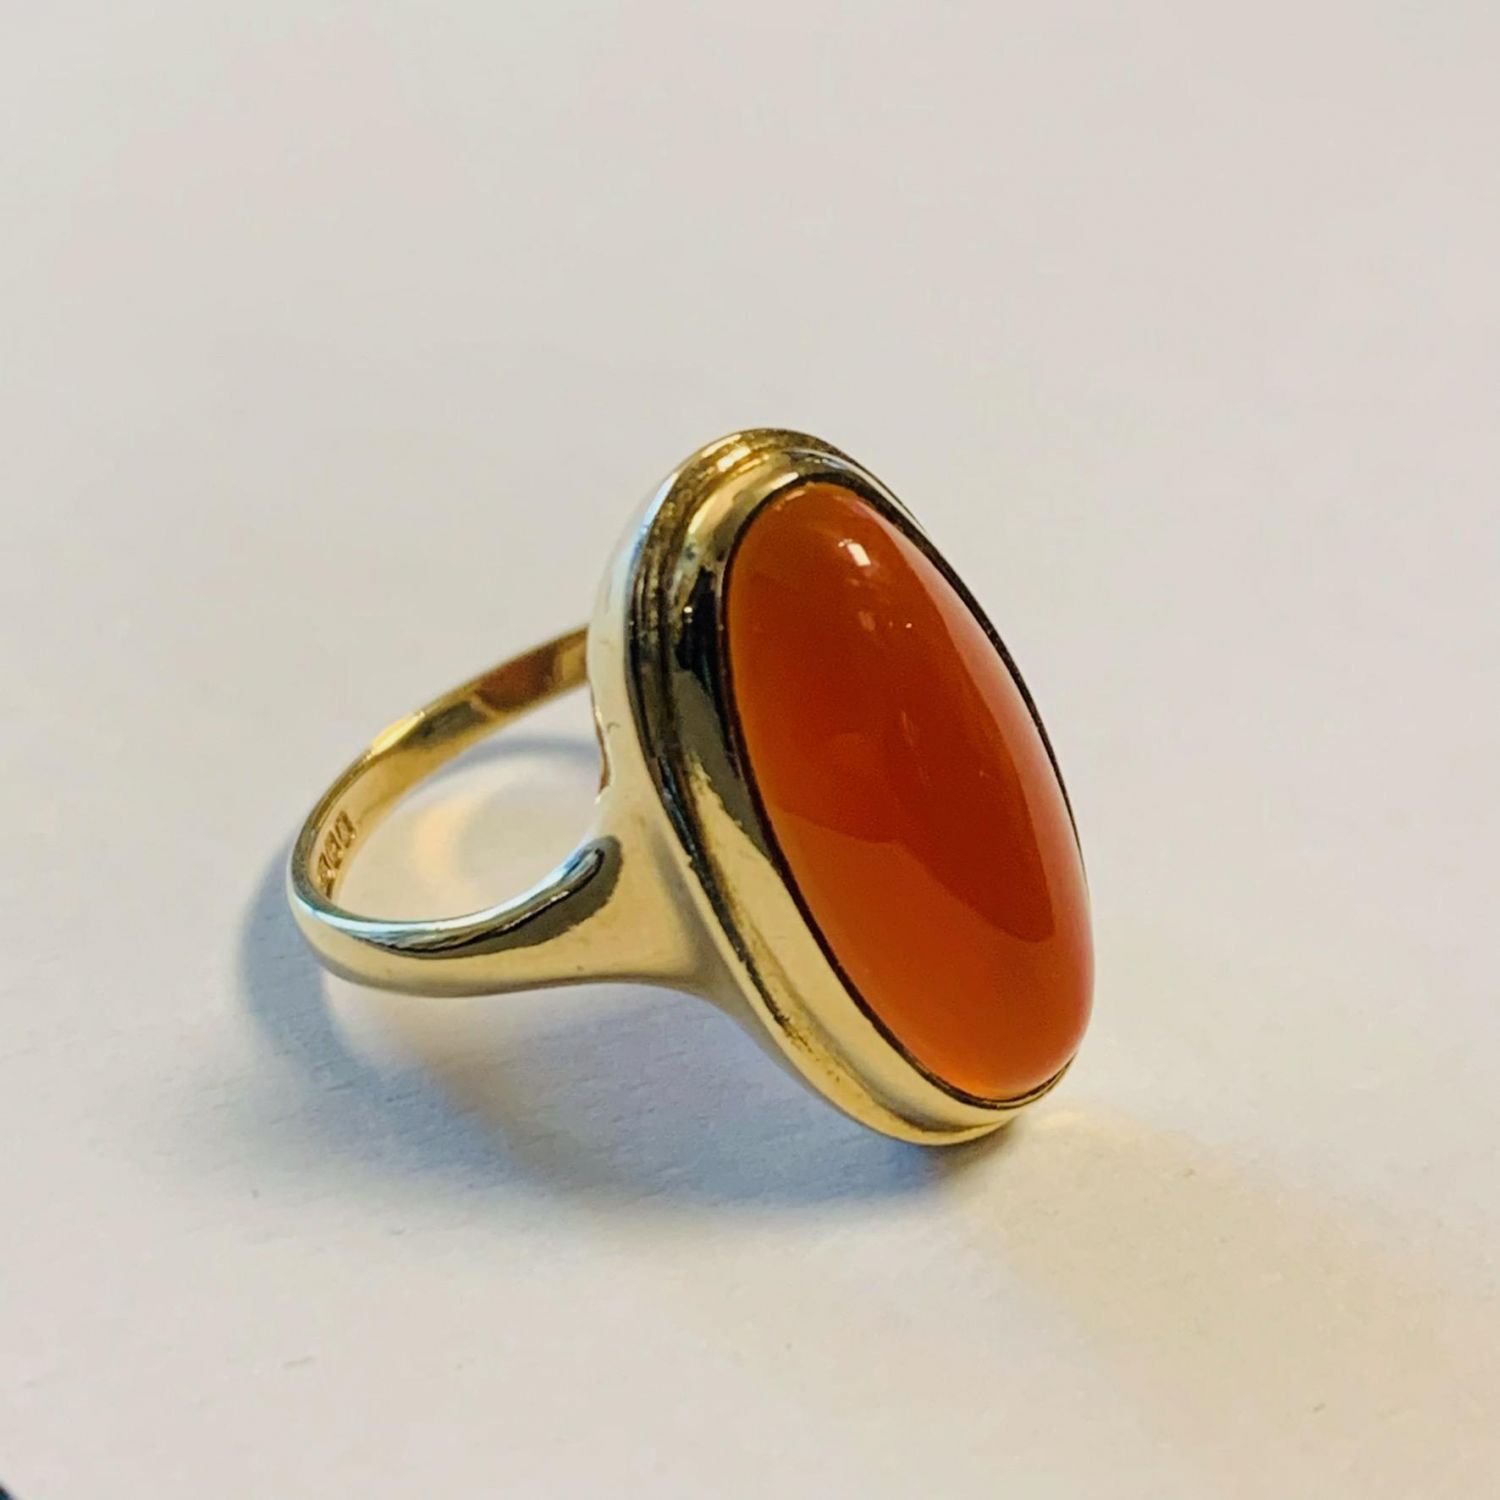 Vintage 9ct Gold Carnelian Ring - Jewellery & Gold - Hemswell Antique ...